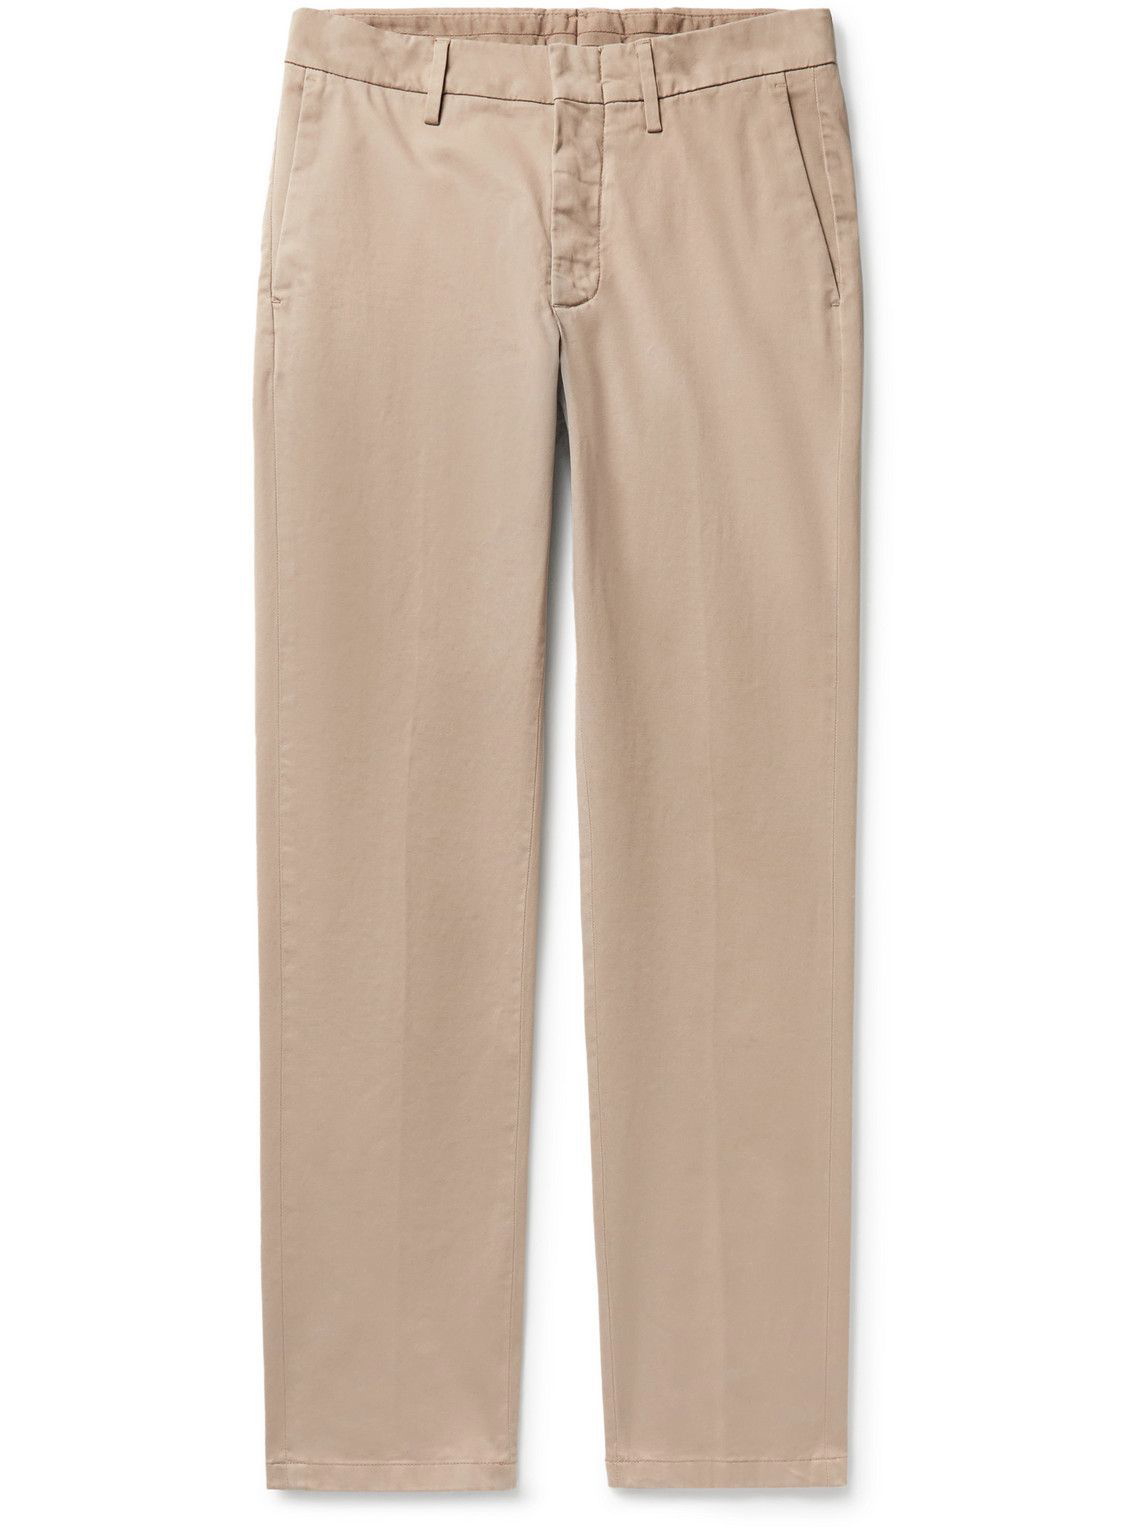 Dunhill - Slim-Fit Stretch-Cotton Twill Chinos - Neutrals Dunhill